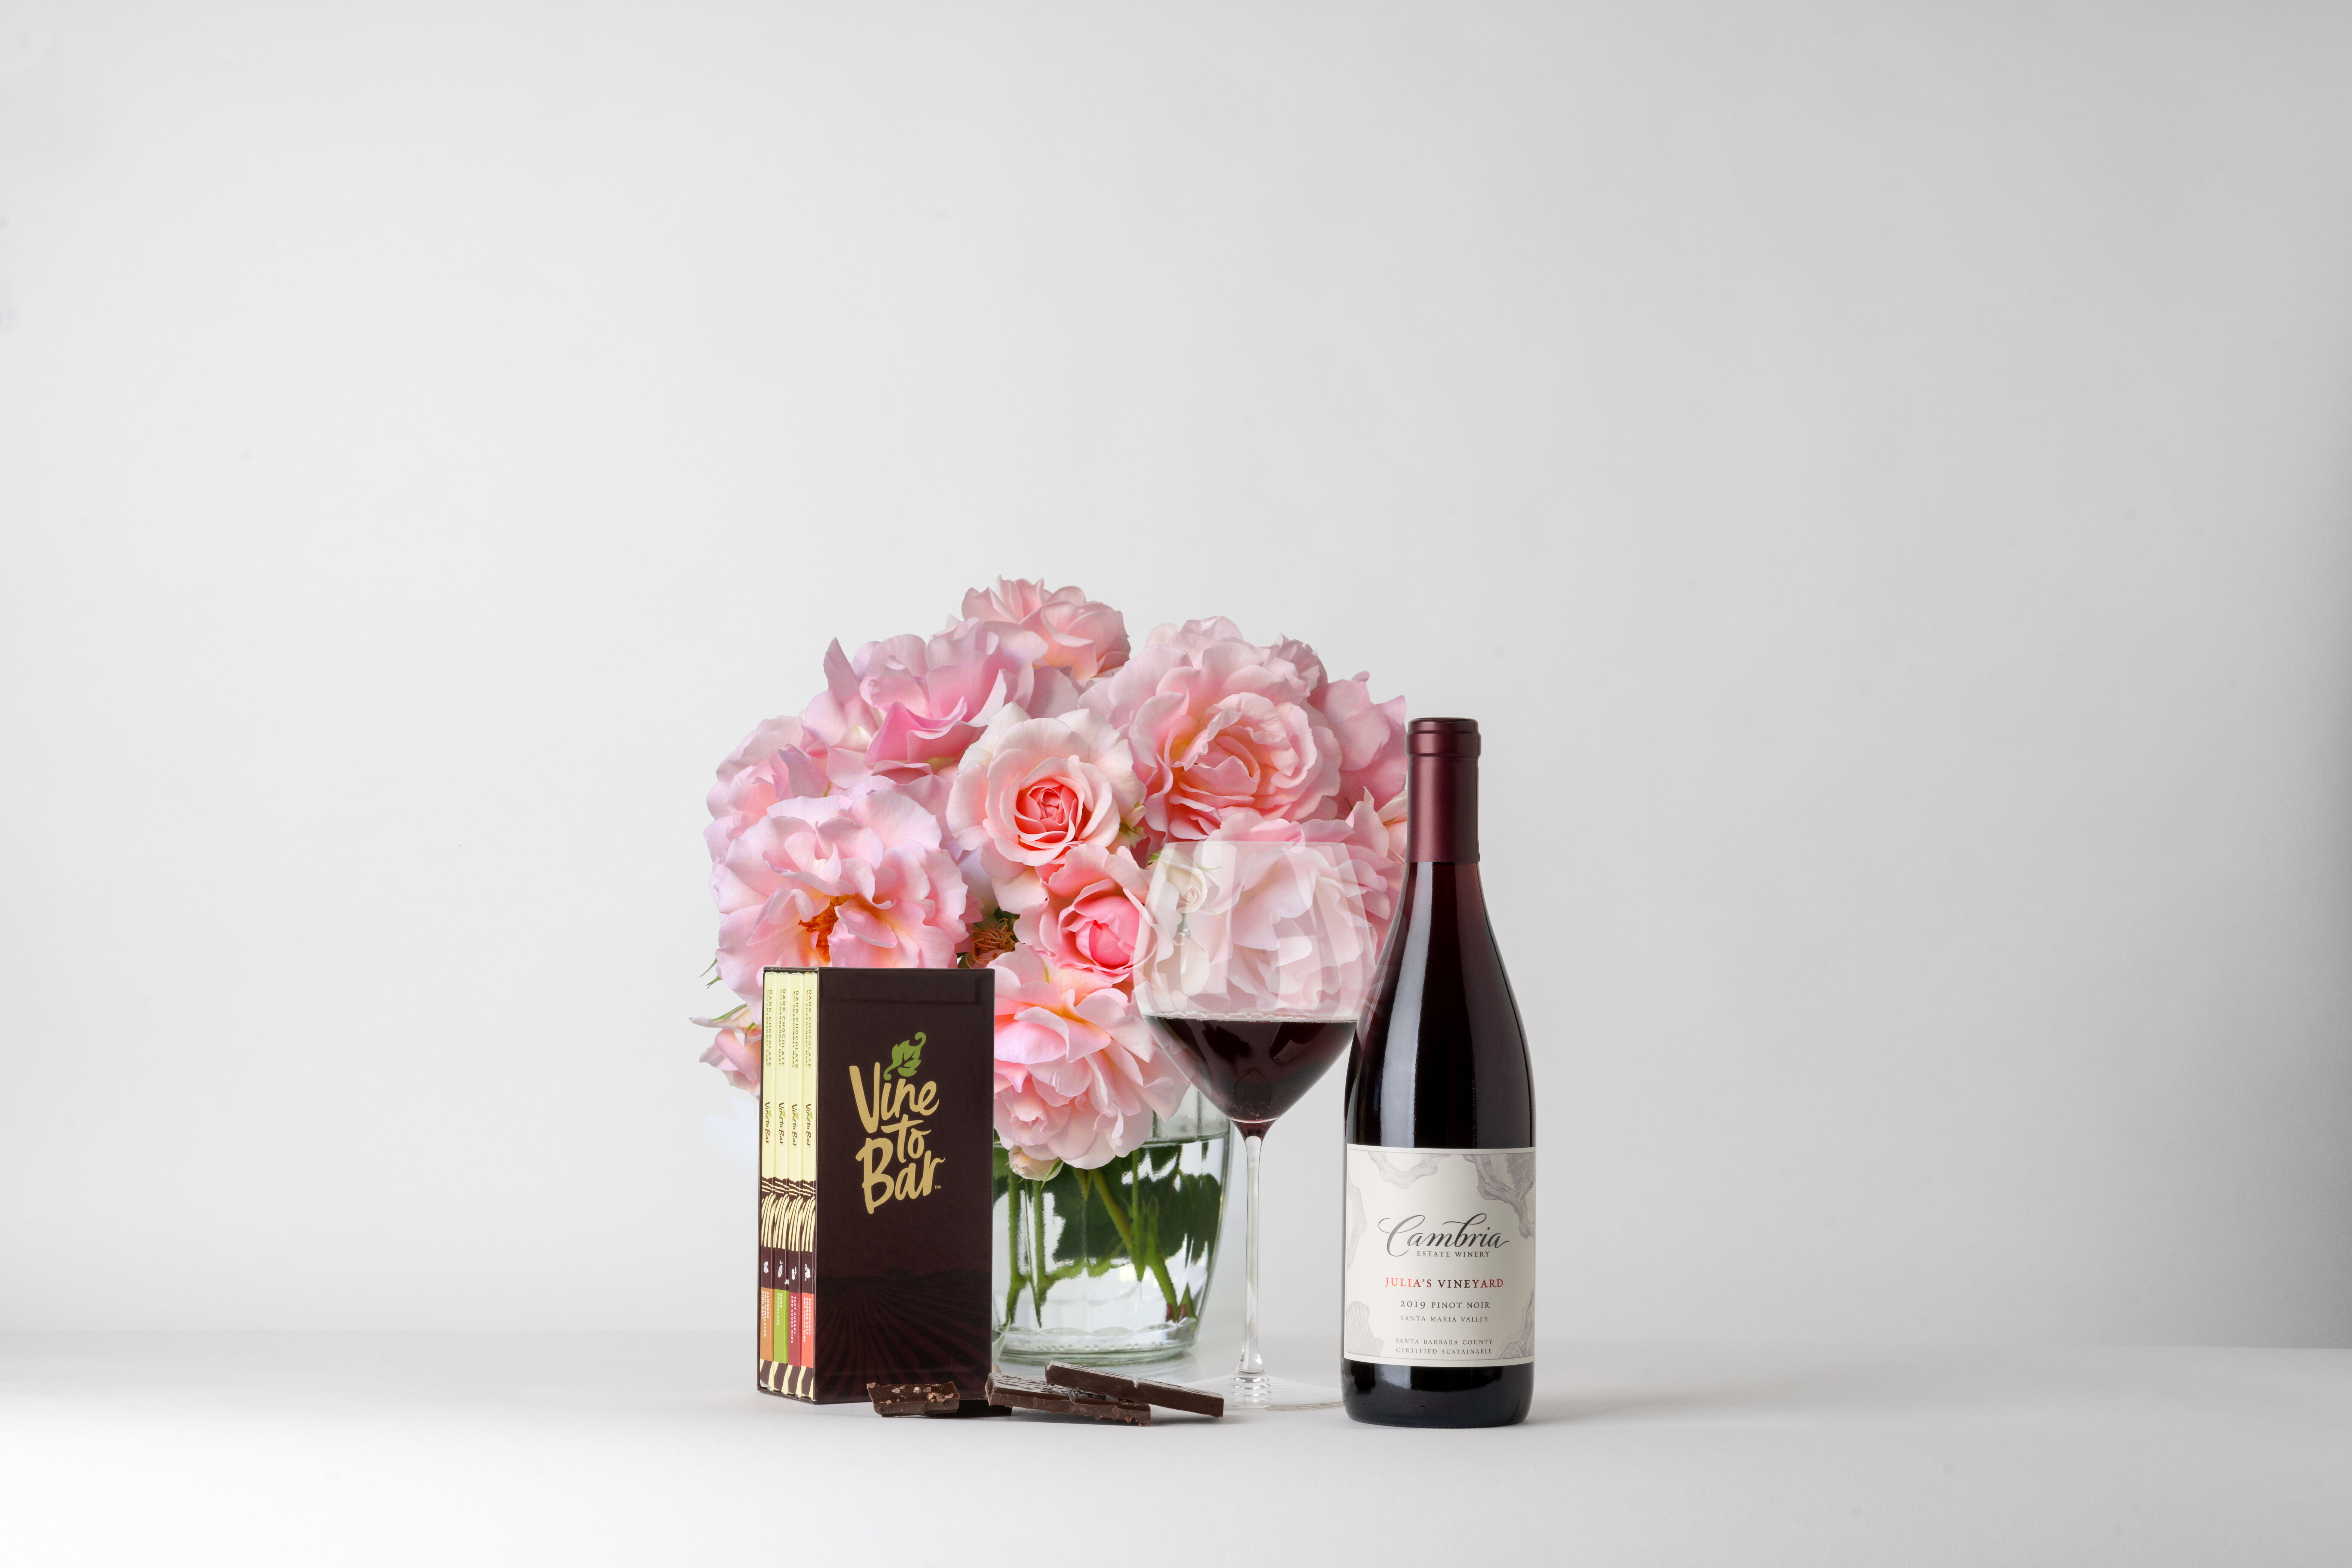 Rose wine and gift box with ribbon and dessert